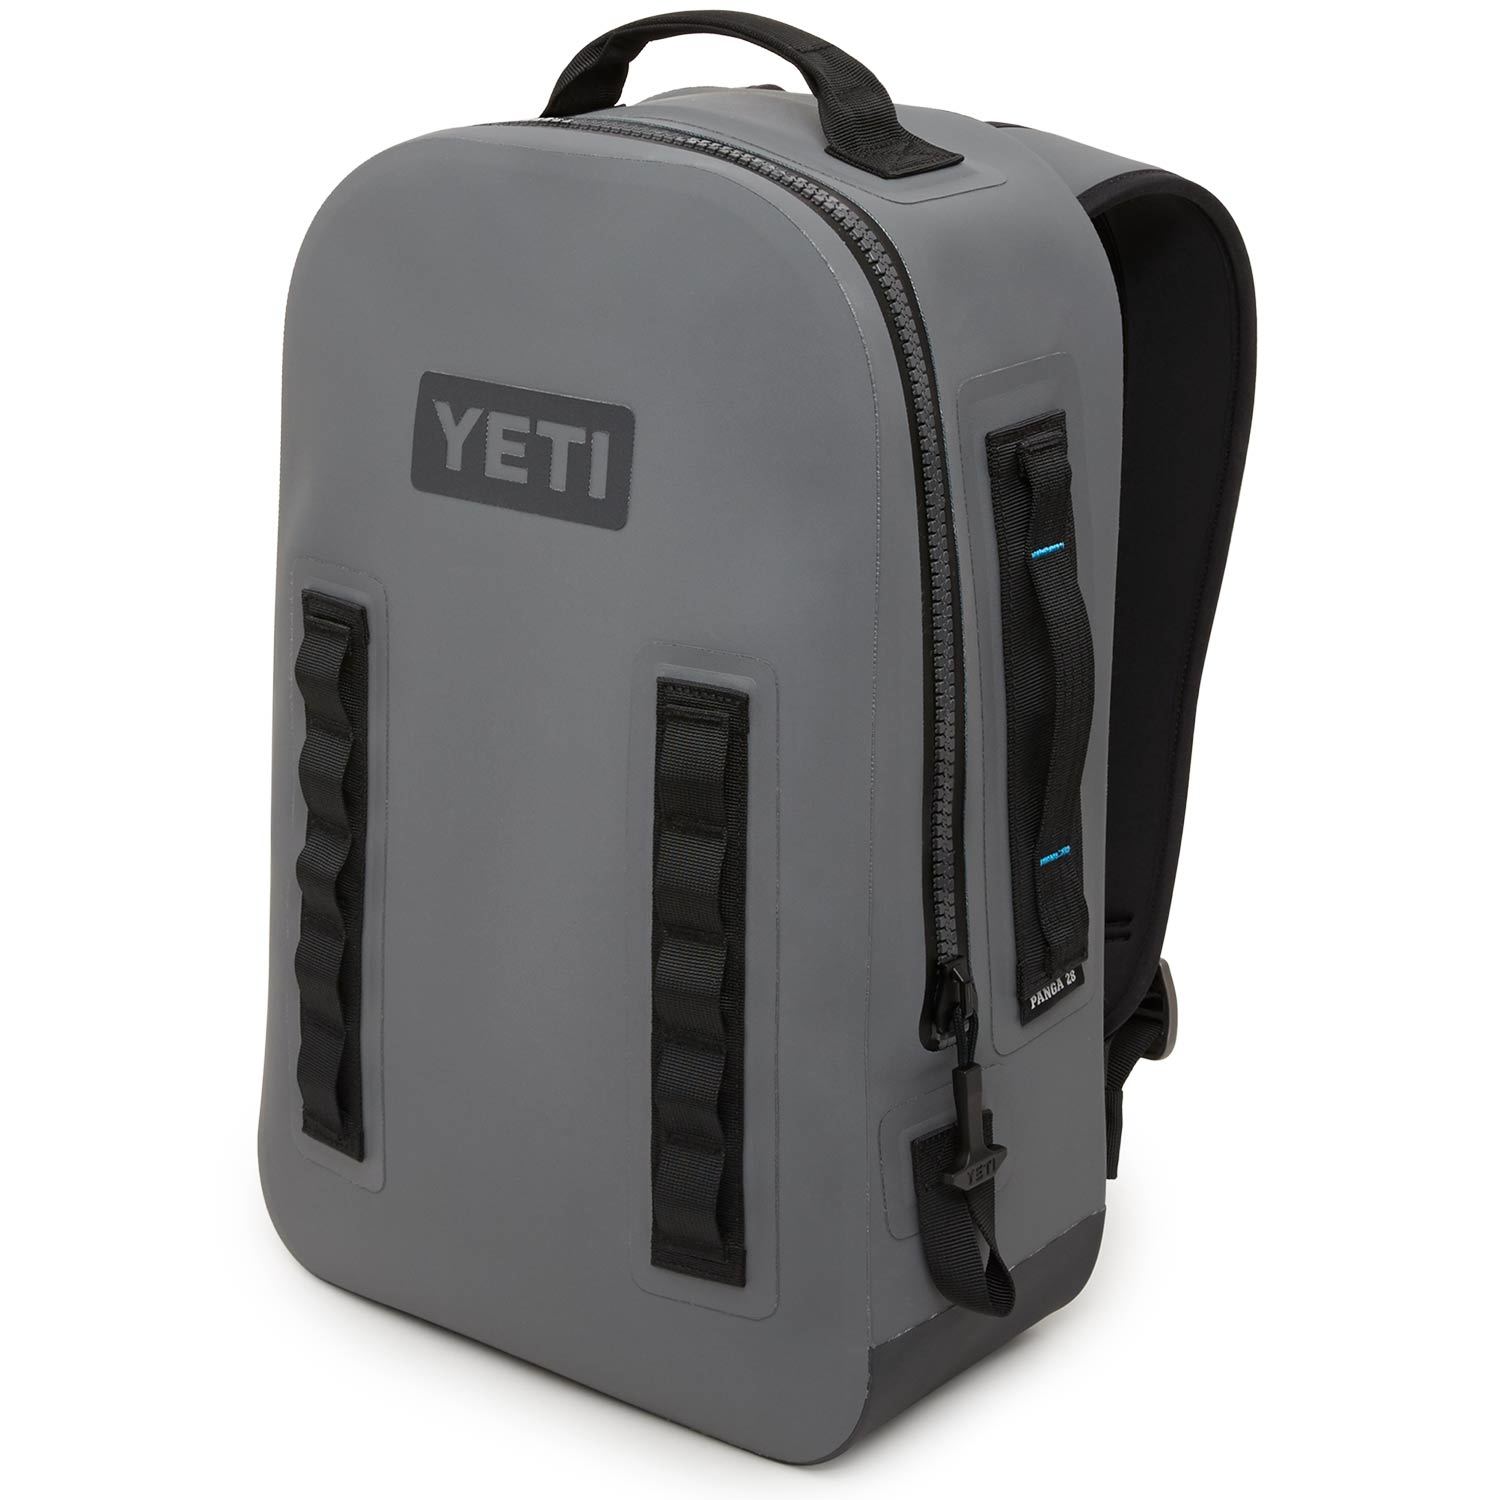 YETI Panga Backpack: A Standout Submersible Dry Bag You Can Count On